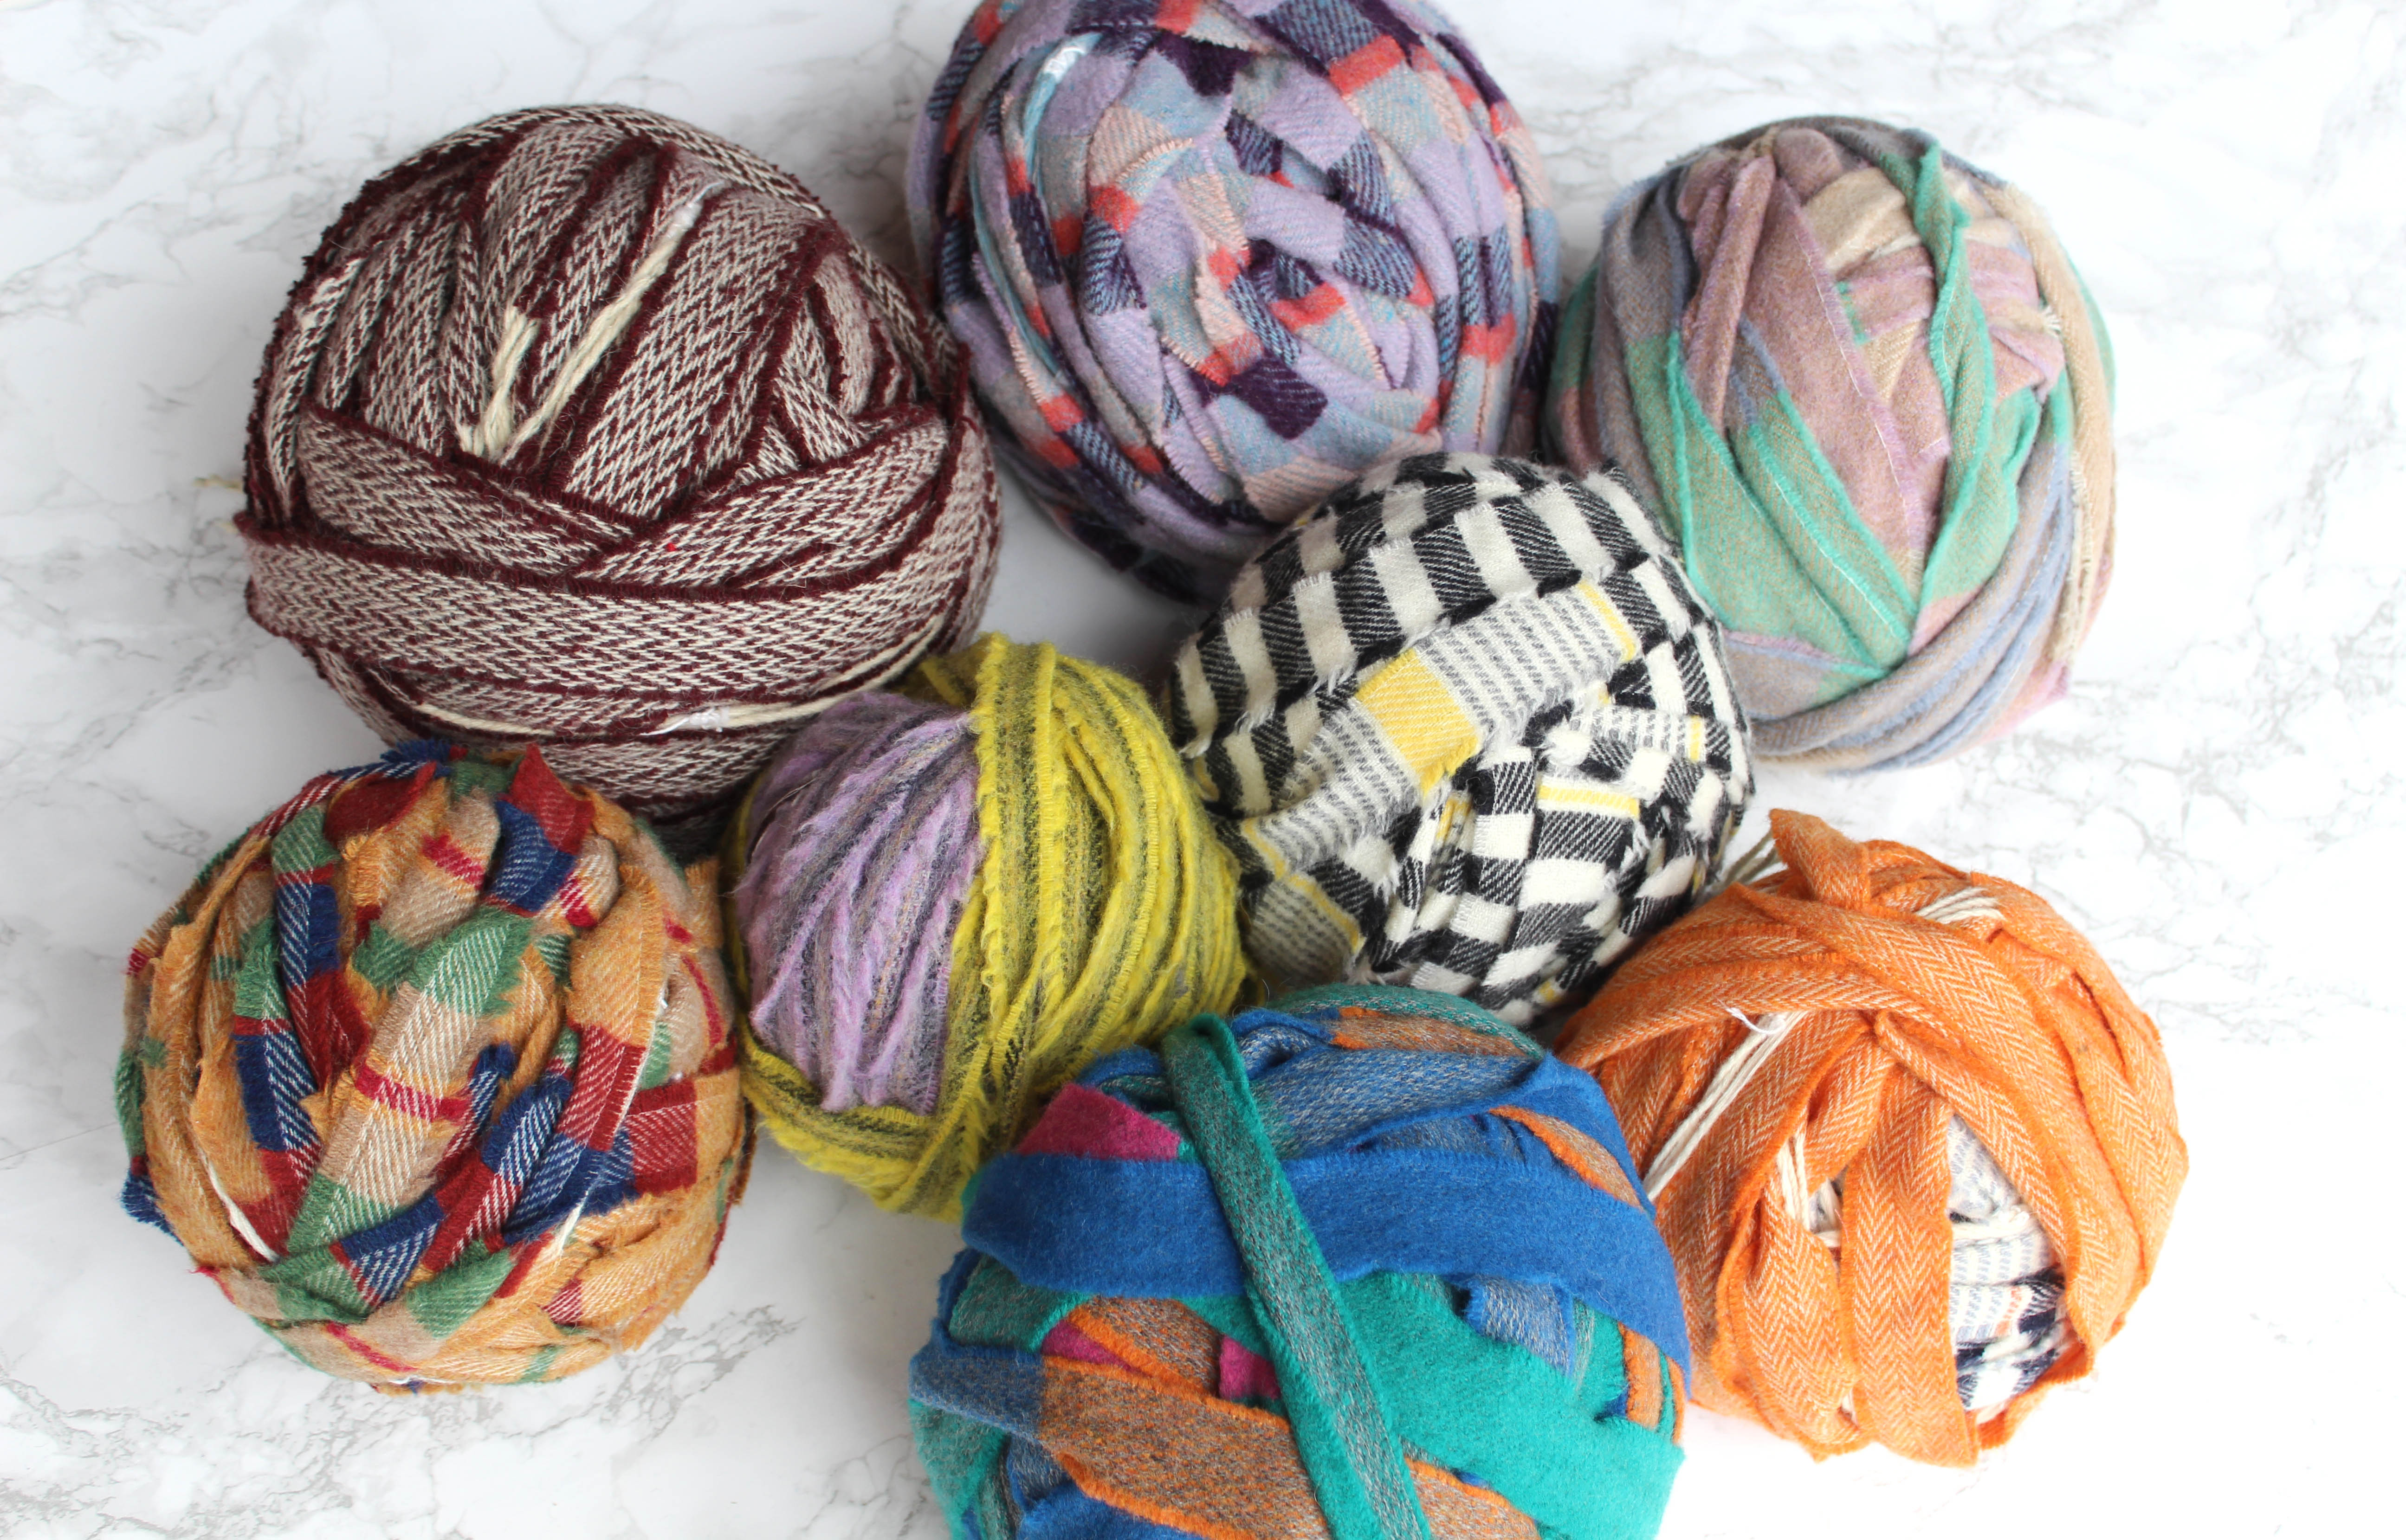 Balls of multicoloured and plaid blanket yarn for craft